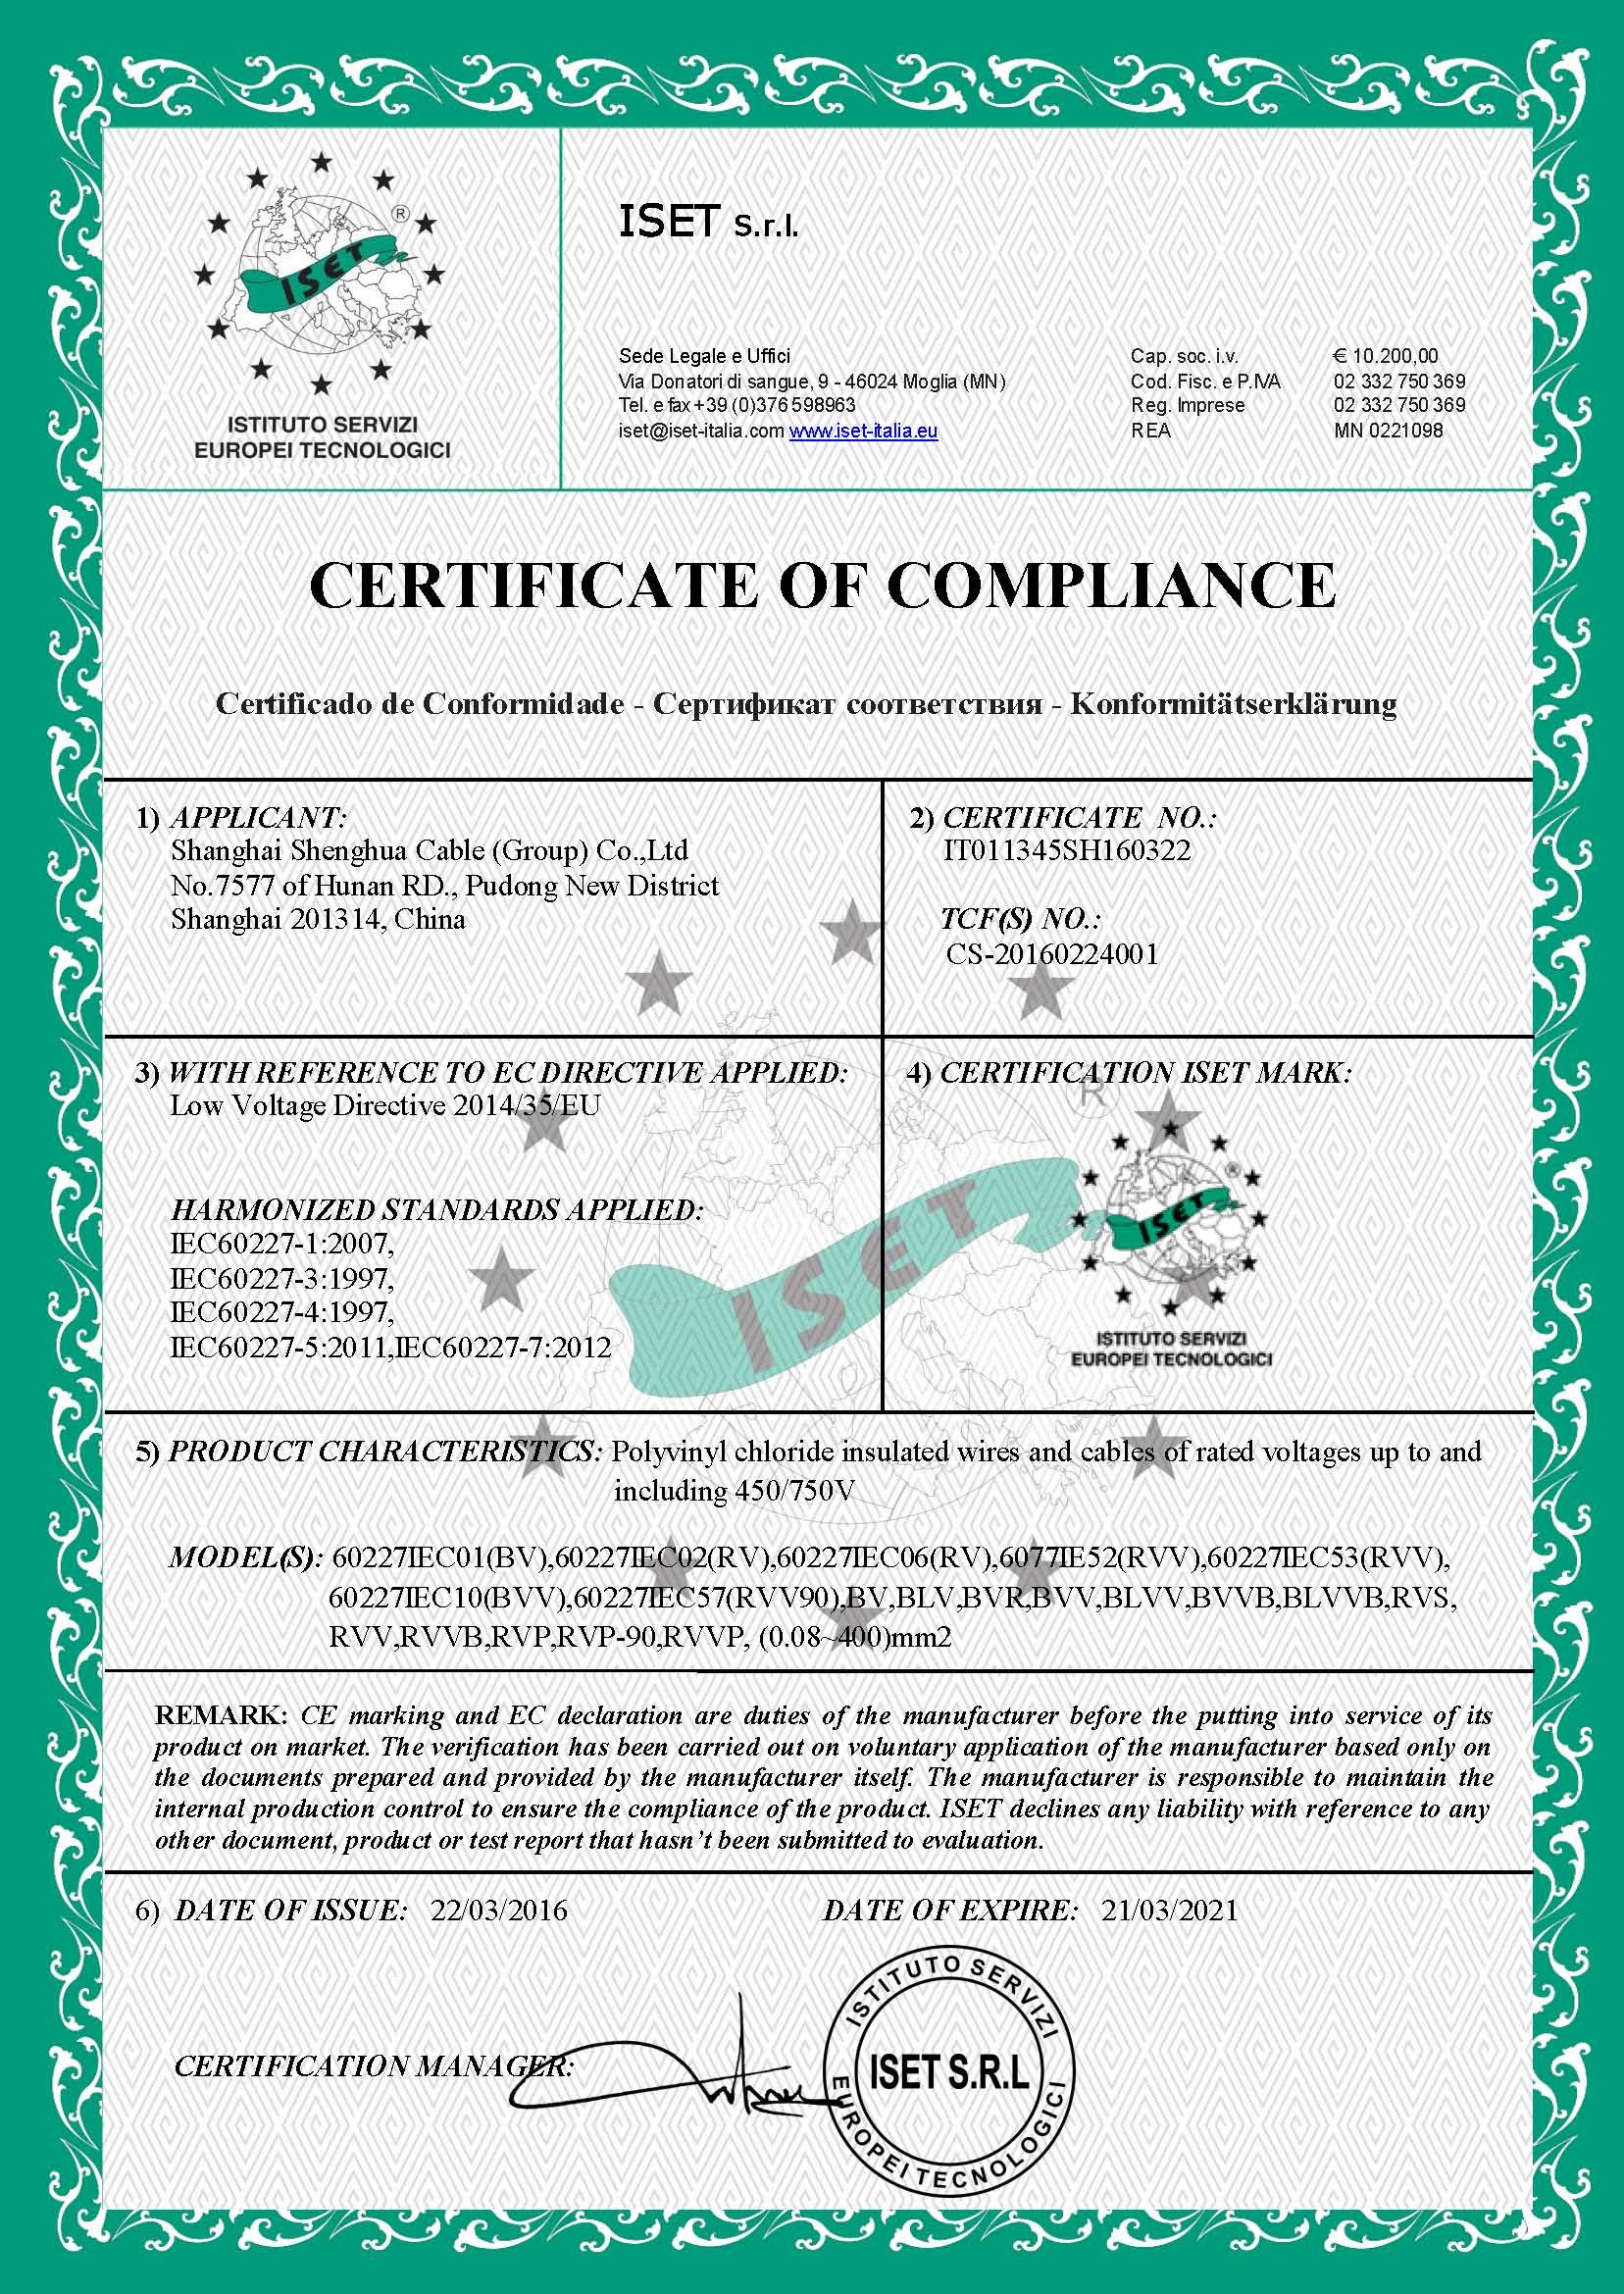 Shanghai Shenghua Cable (Group) Co., Ltd. Certifications